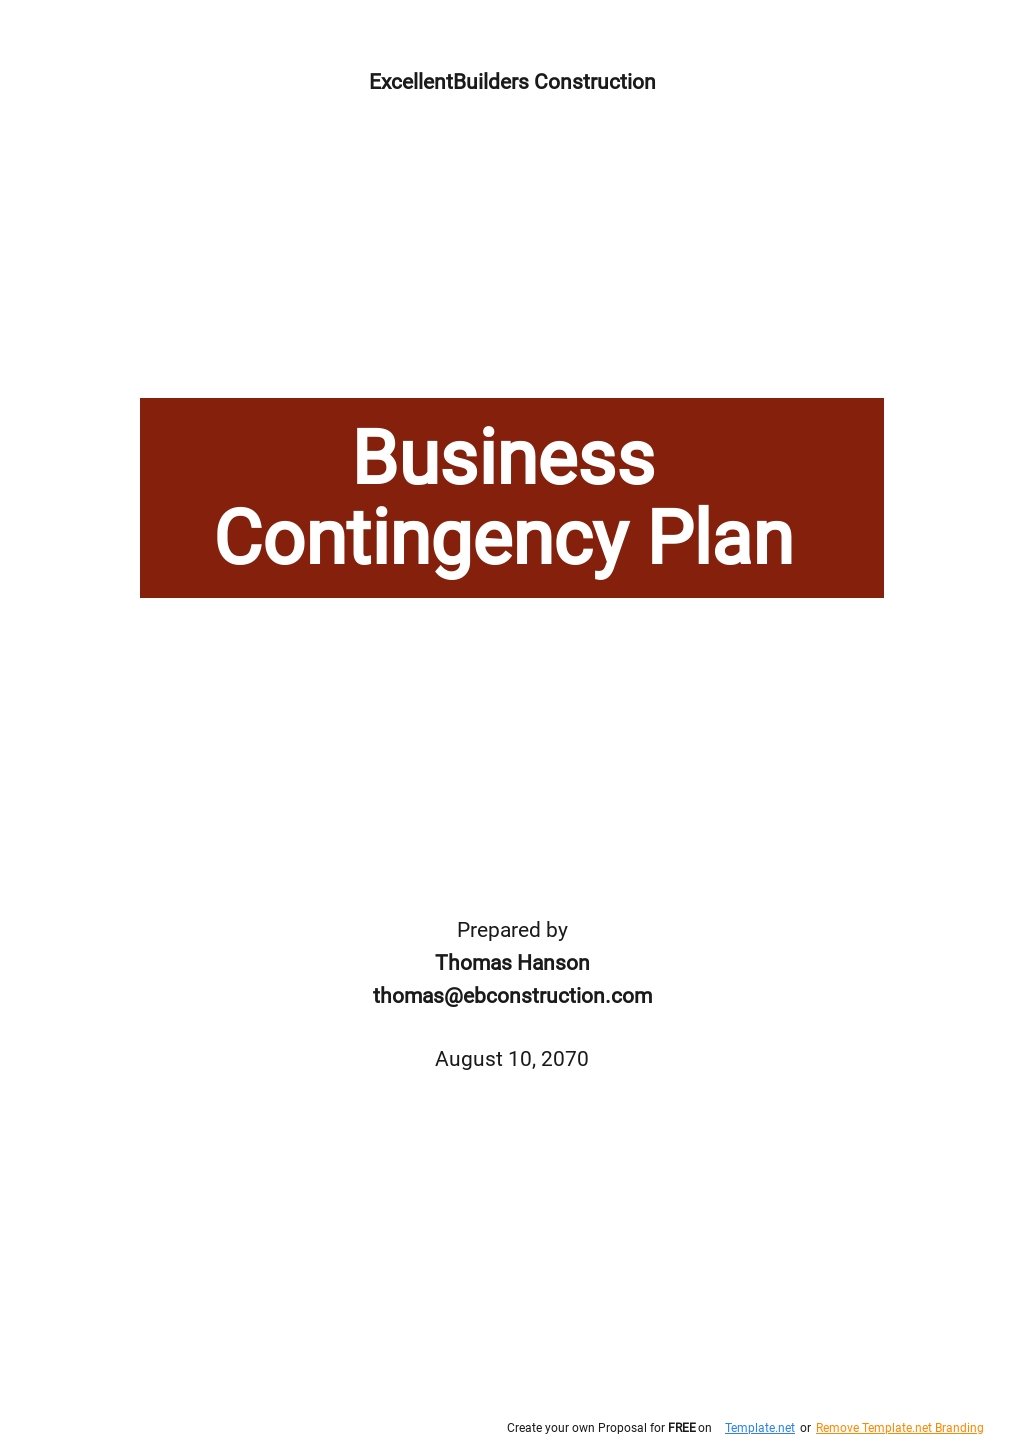 Business Contingency Plan Template .jpe